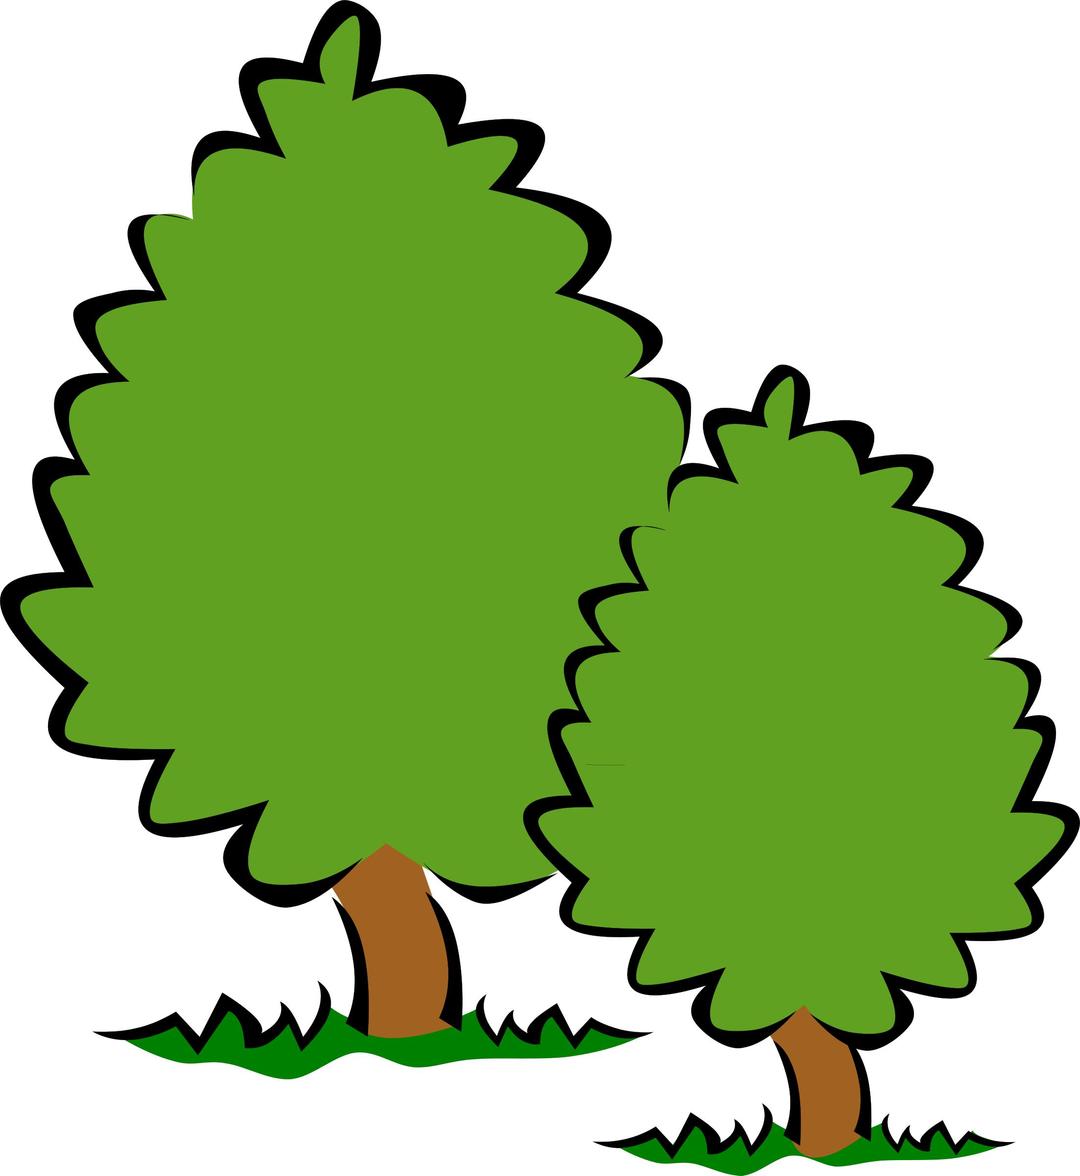 Small Trees / Bushes png transparent